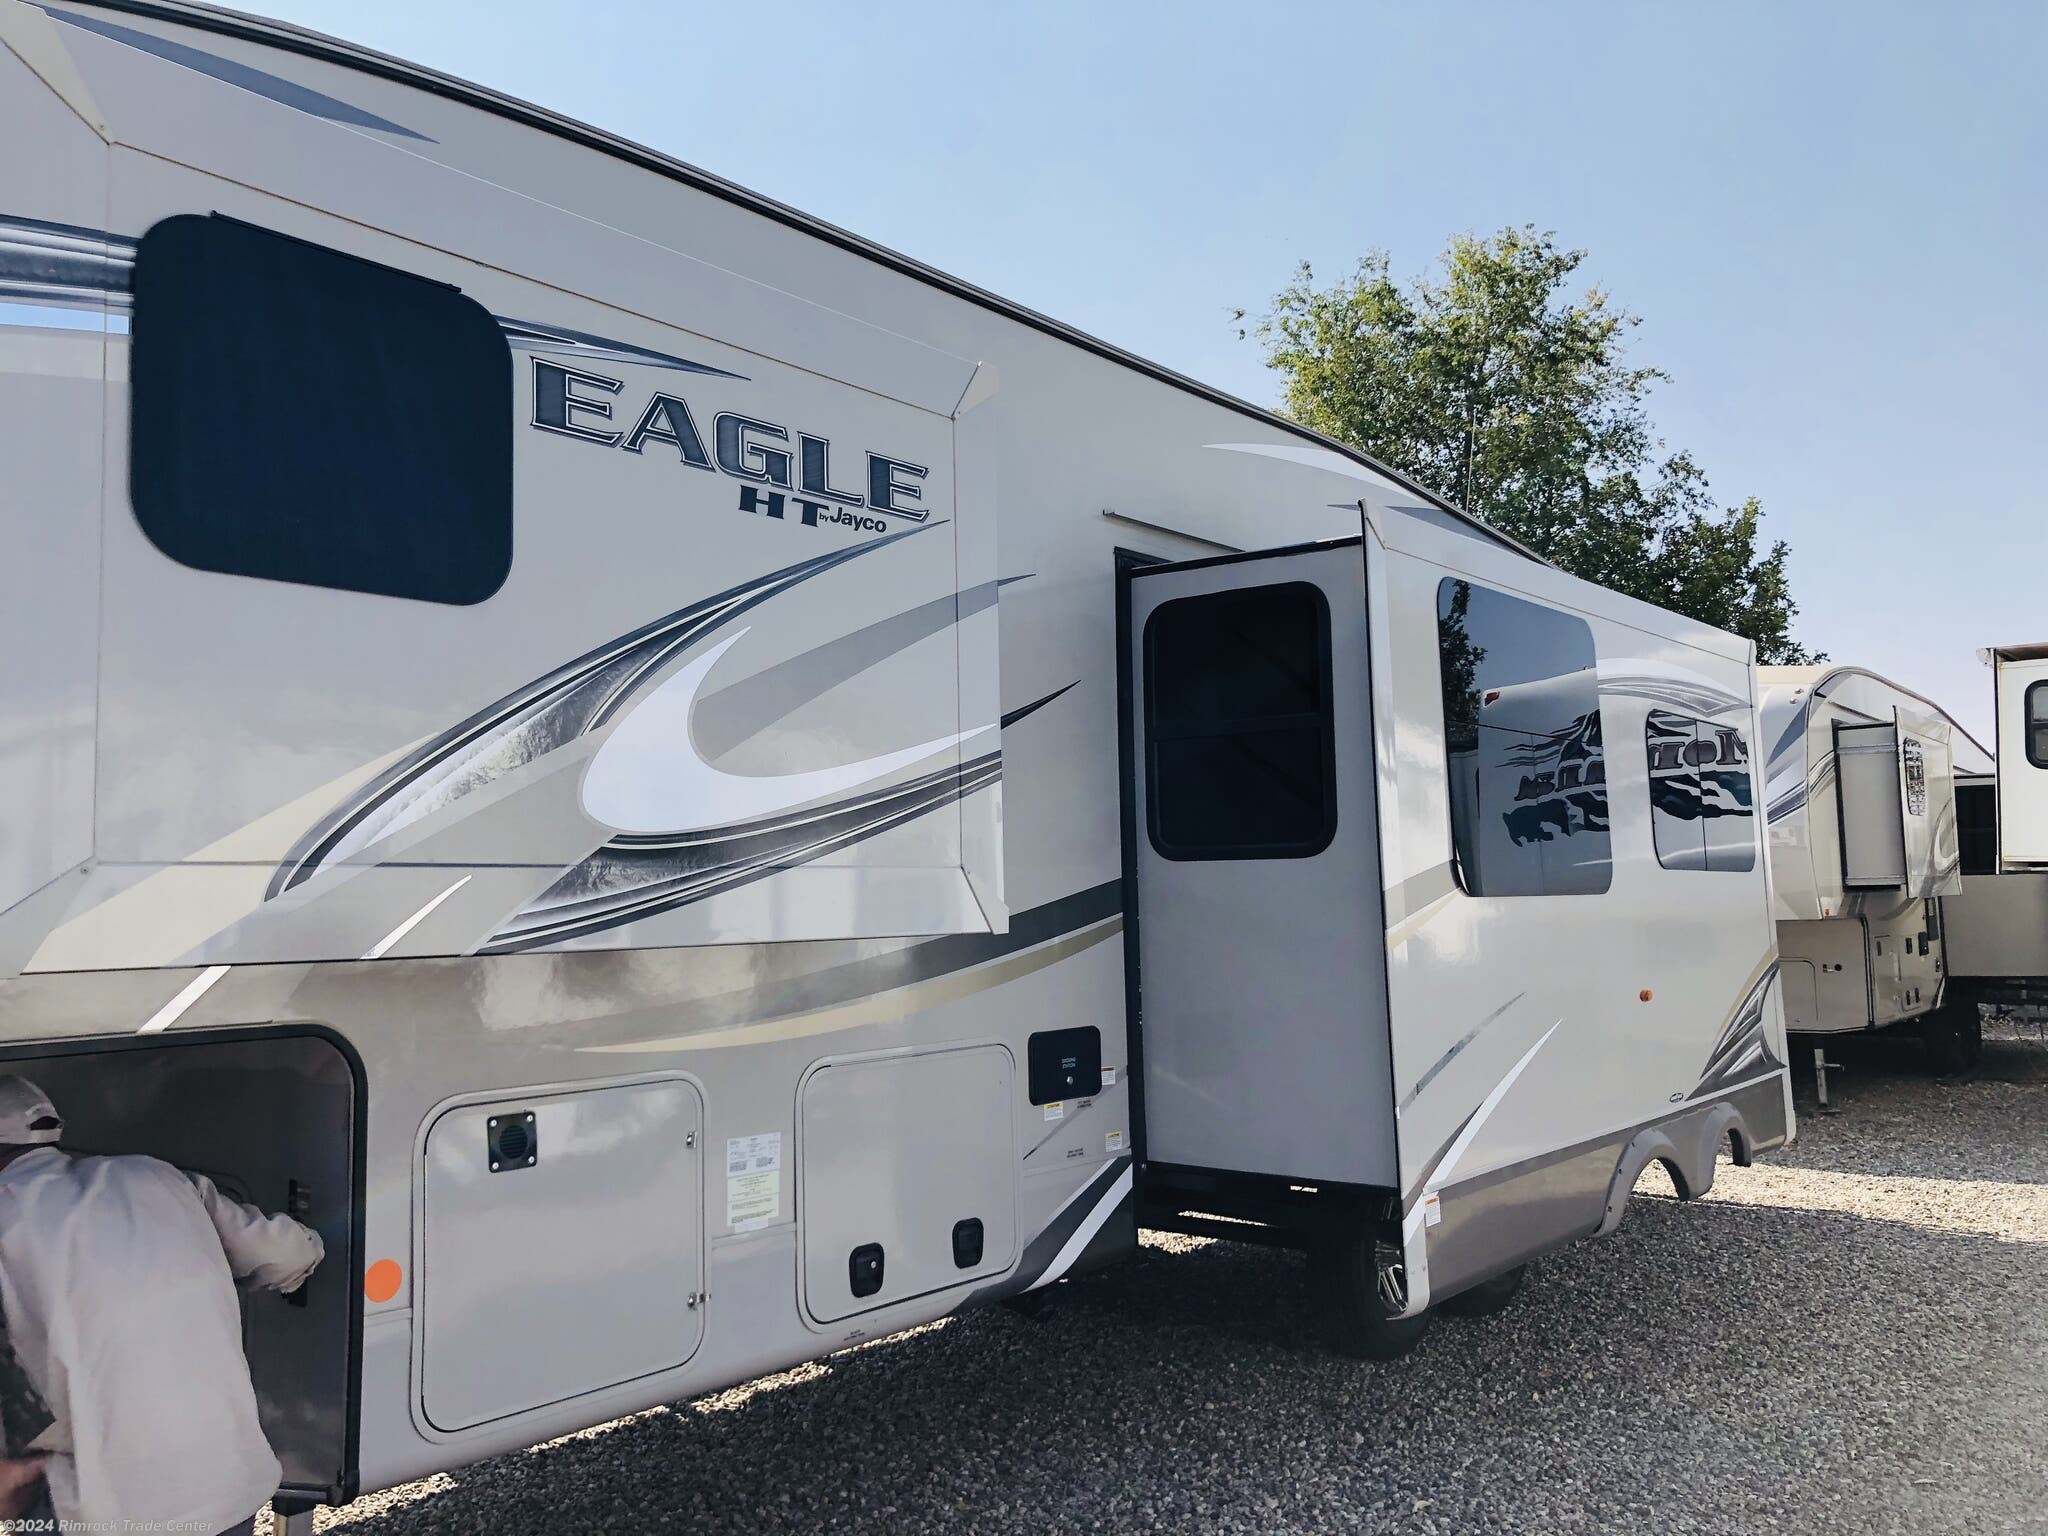 2018 Jayco Eagle HT 29.5BHDS RV for Sale in Grand Junction, CO 81505 2018 Jayco Eagle Ht 29.5 Bhds Specs